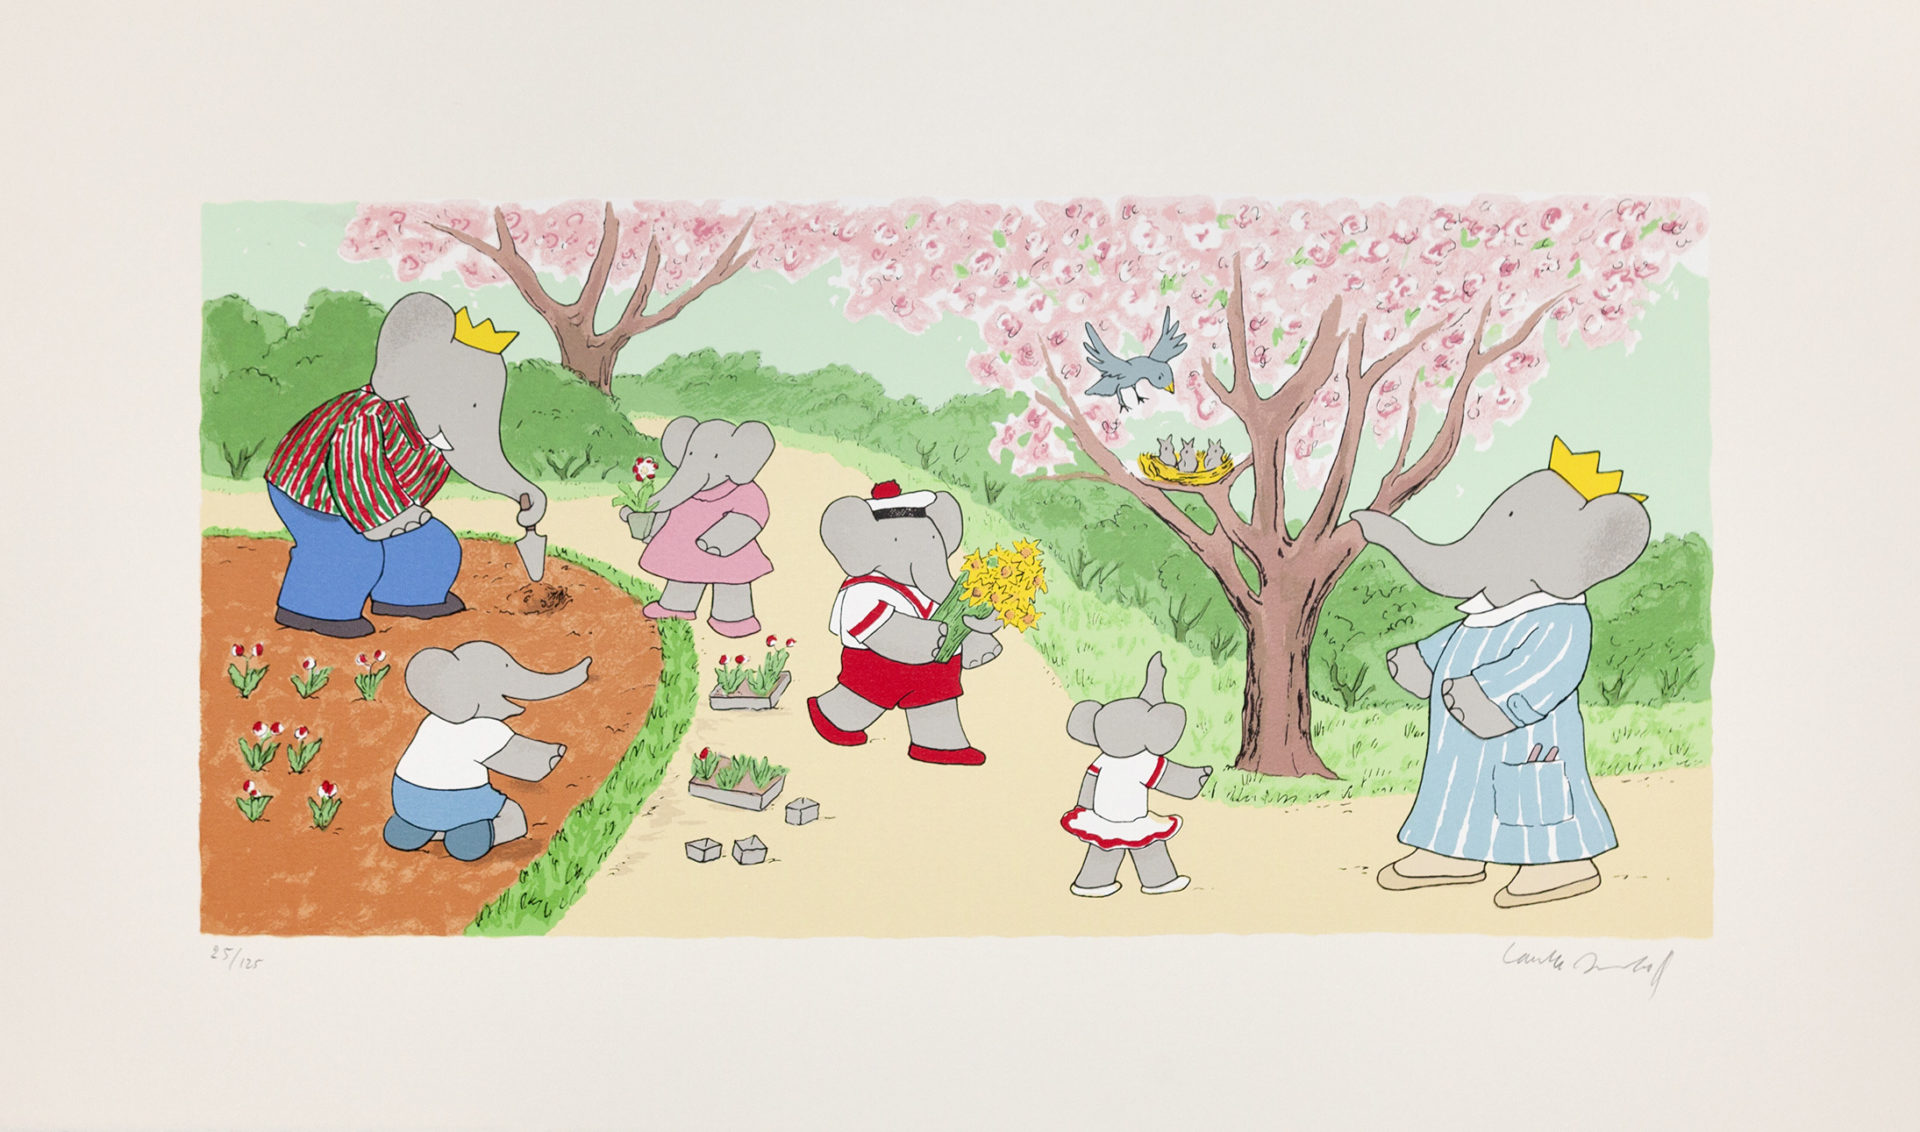 What Could Be Better Than Gardening in Spring?, 2008, Silkscreen, 16 1/2 x 28 1/4 inches (41.9 x 71.8 cm), Edition of 125